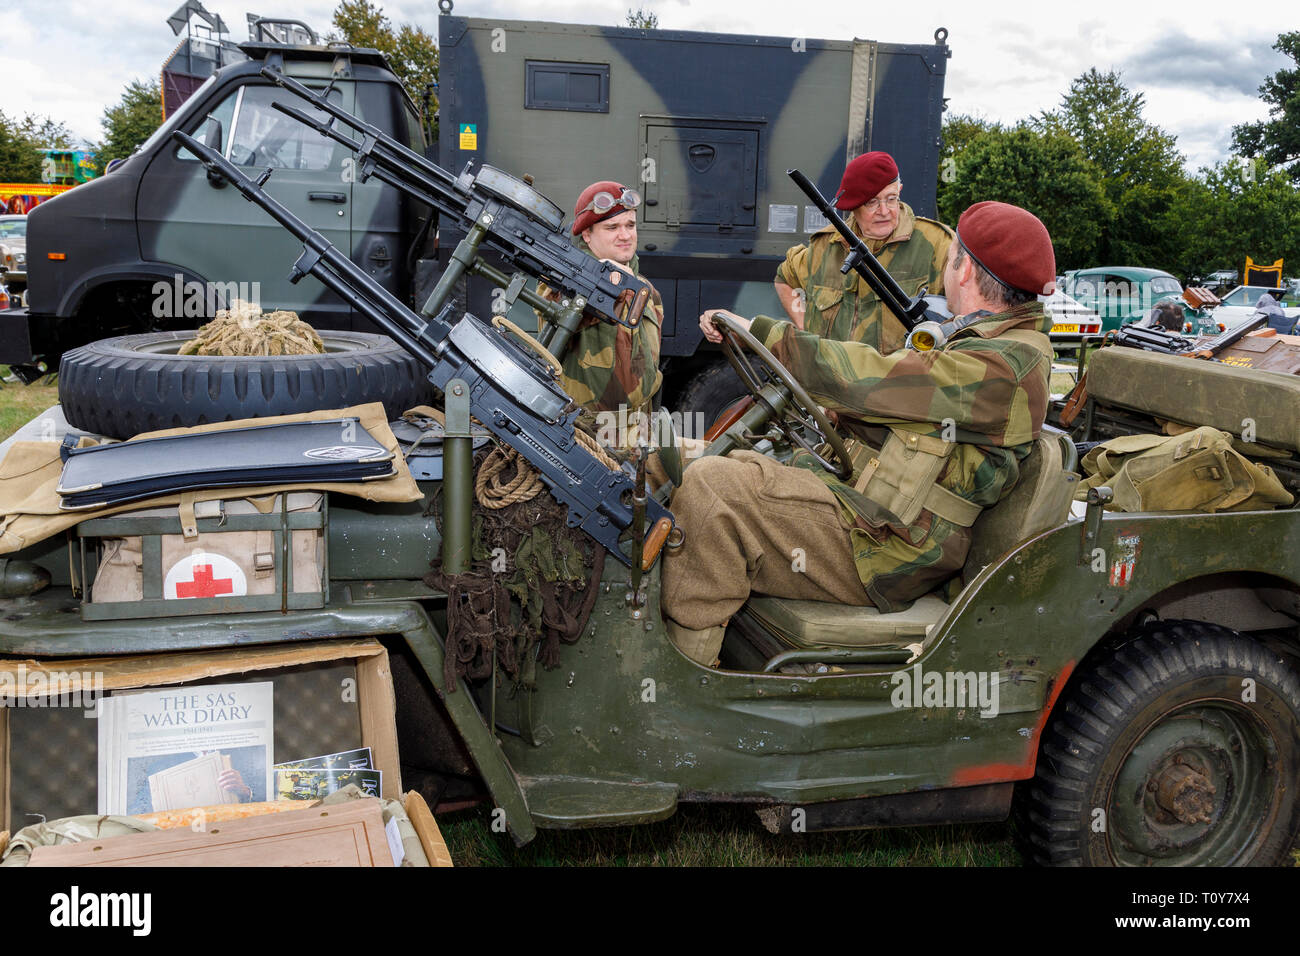 Military vehicle display at the 2018 Aylsham Agricultural Show, Norfolk, UK. Stock Photo